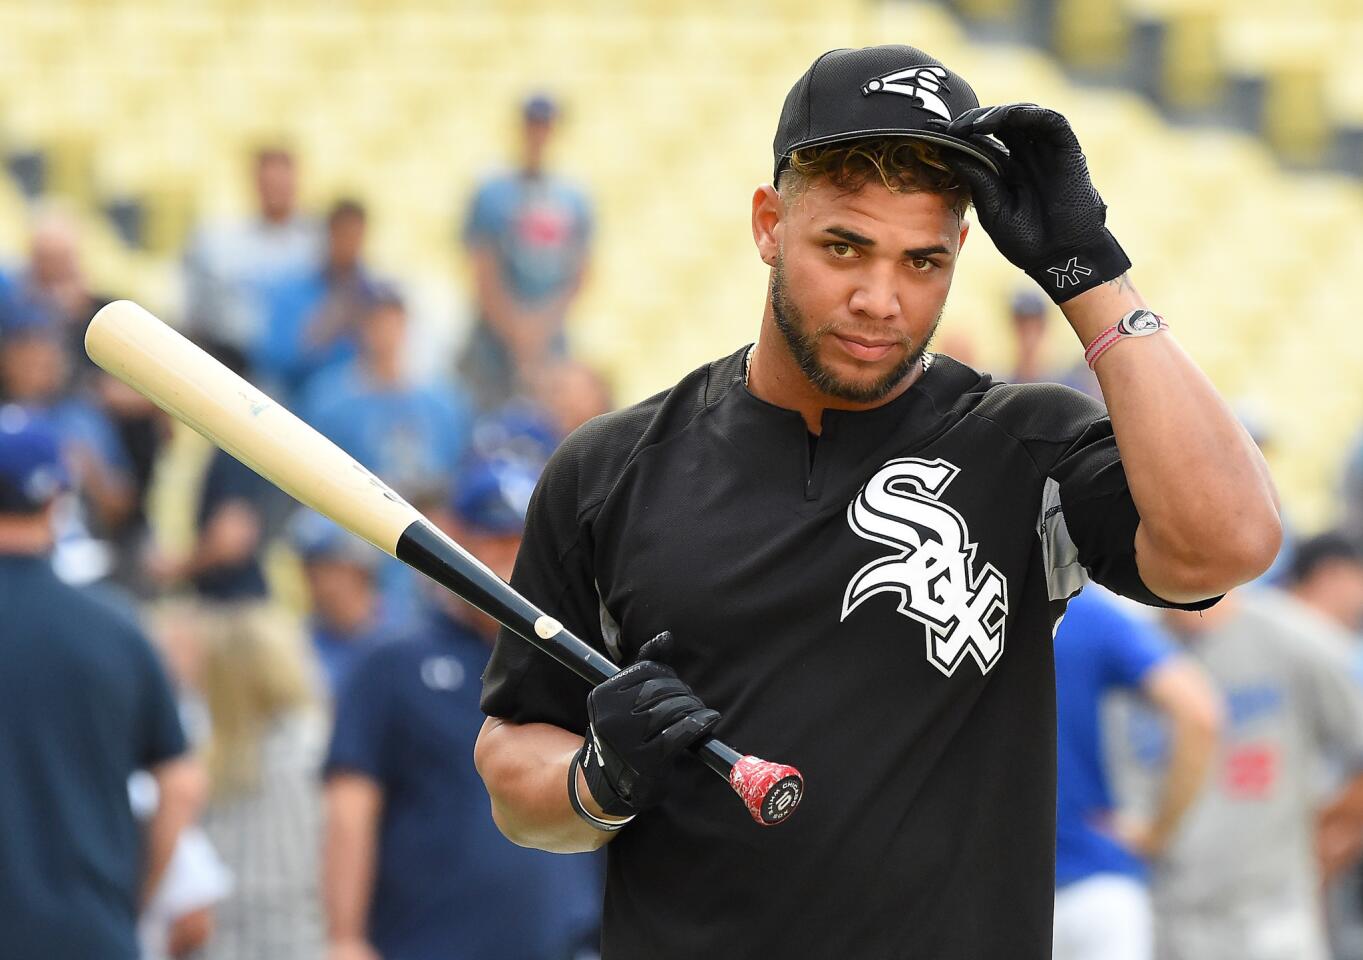 Yoan Moncada warms up before a game against the Dodgers at Dodger Stadium on Aug. 15, 2017 in Los Angeles.